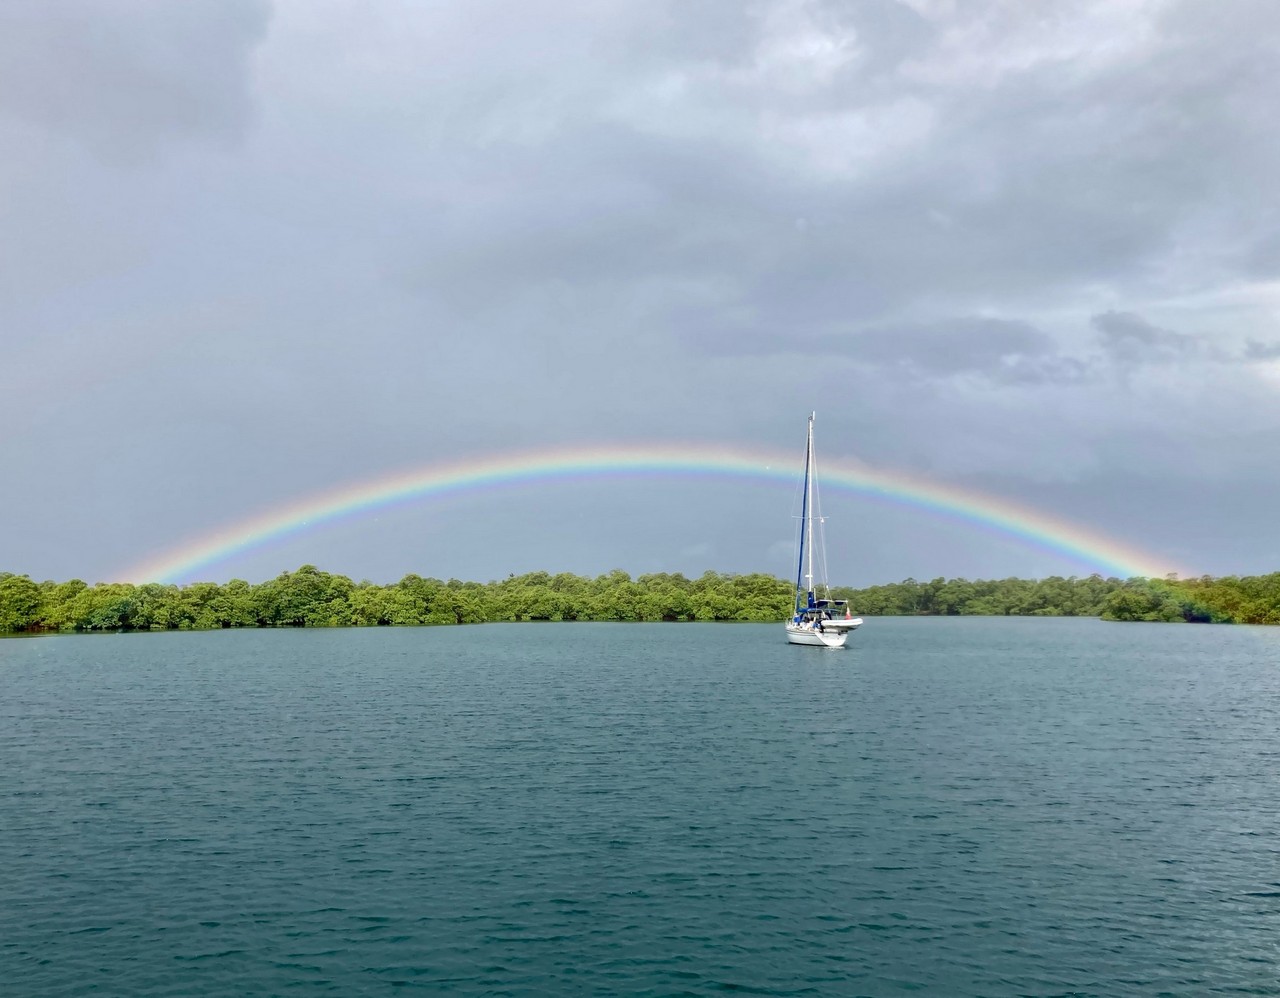 With rain we get rainbows. (Credit to Free Spirit for the photo.)